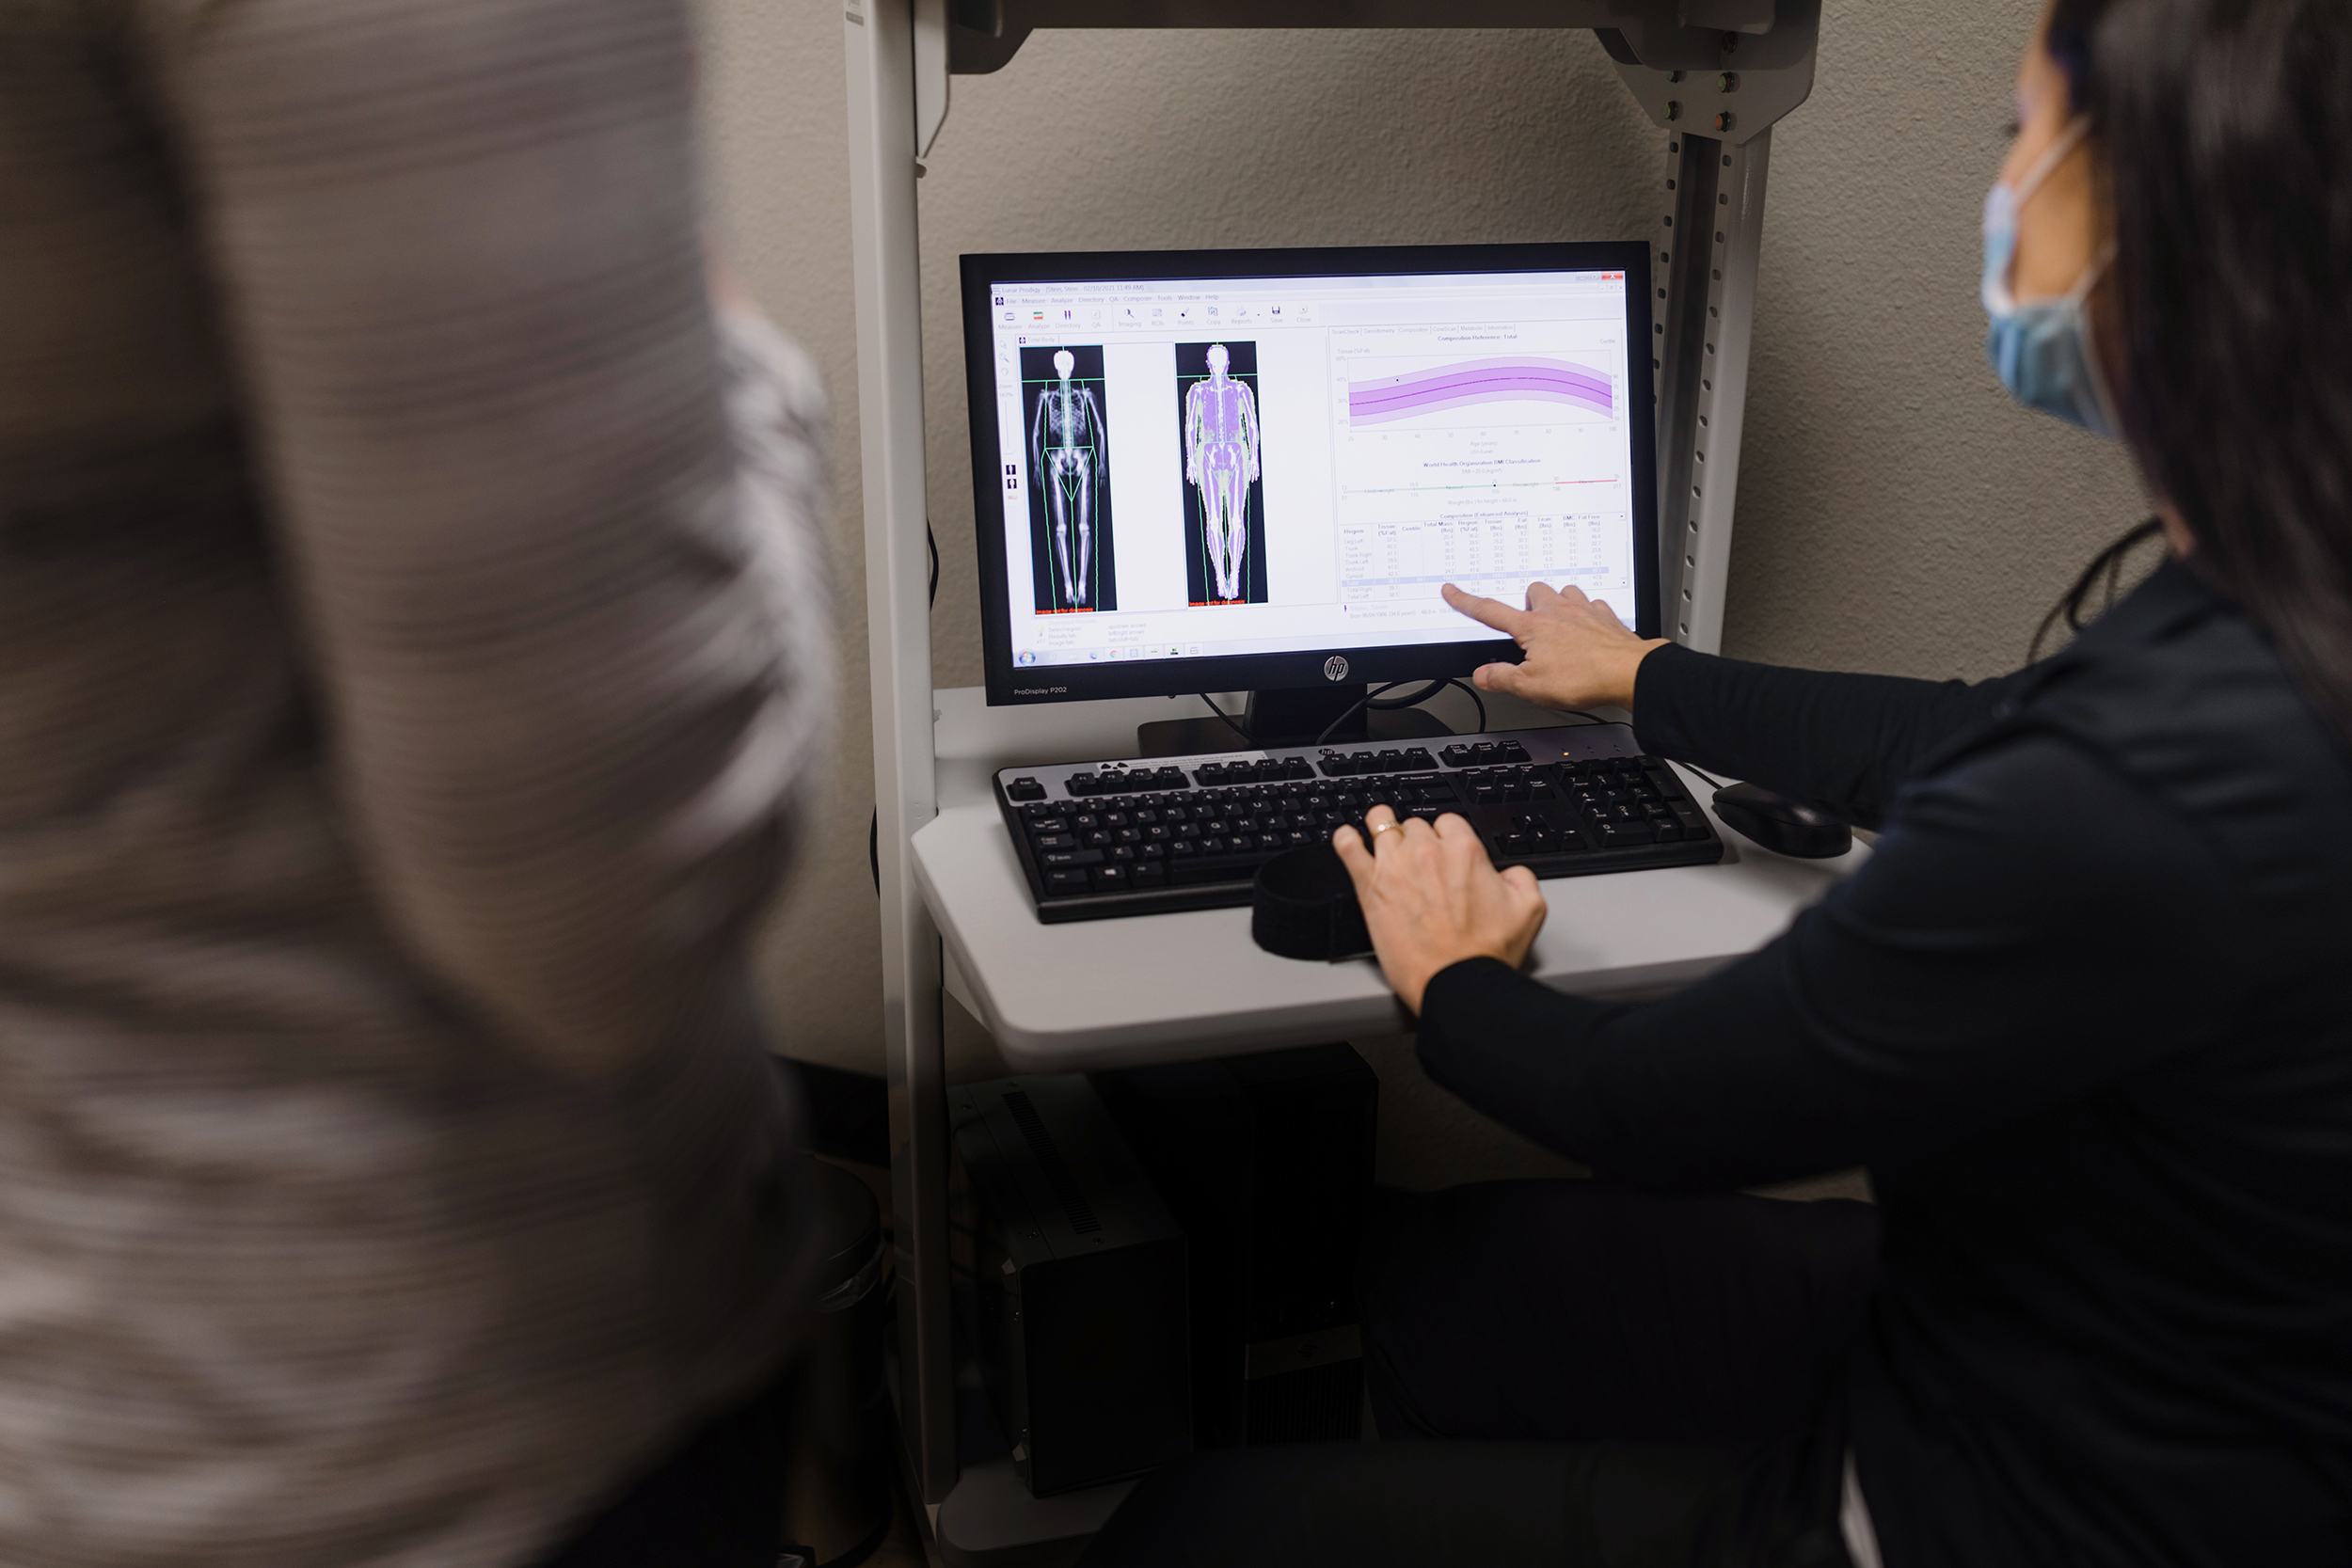 Review your DEXA scan to reach your weight loss goals